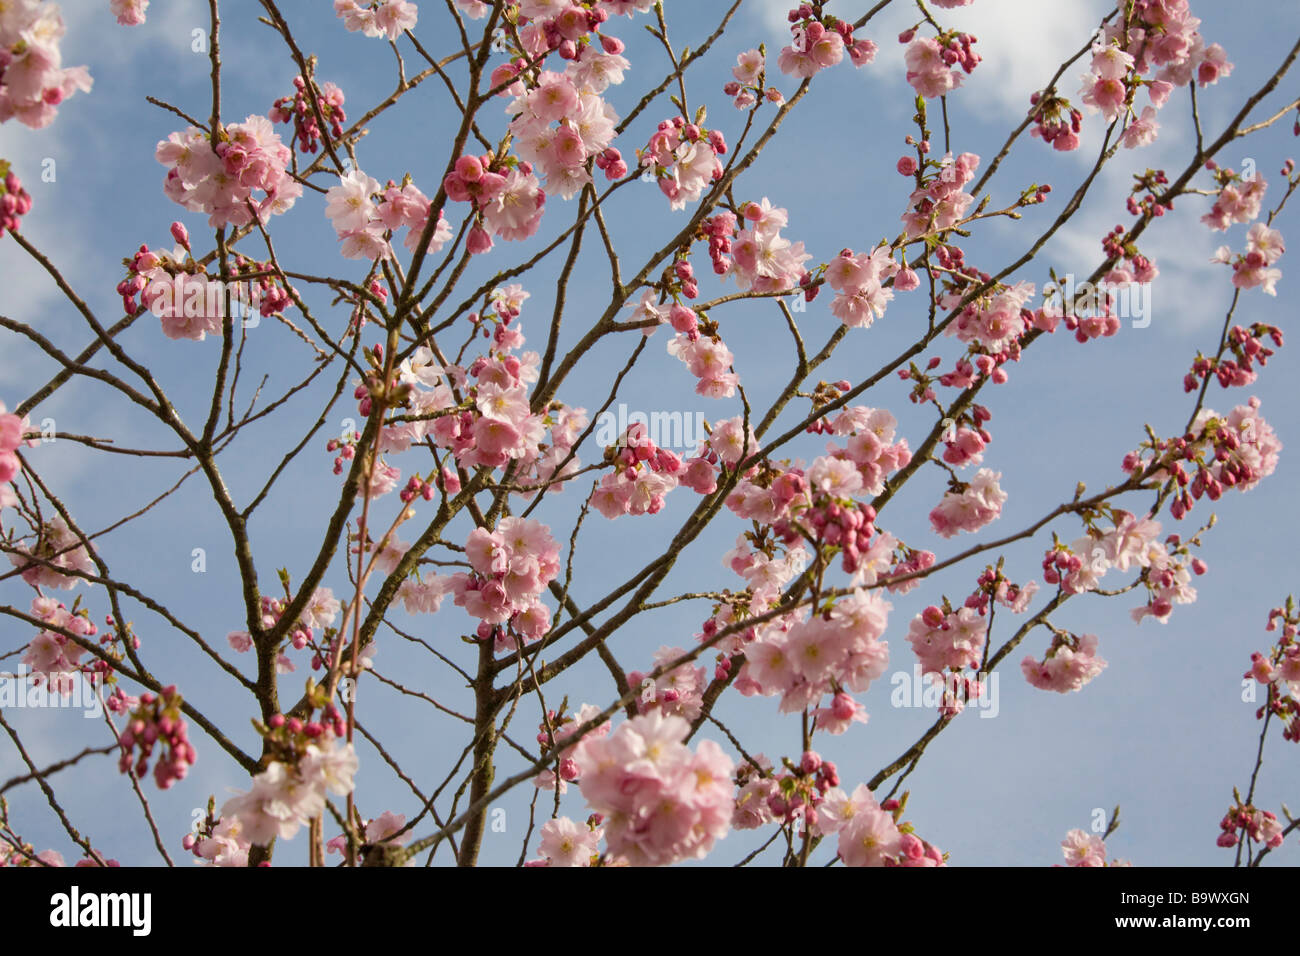 Spring - Cherry Blossom. Heaton Mersey, Stockport, Greater Manchester, United Kingdom. Stock Photo